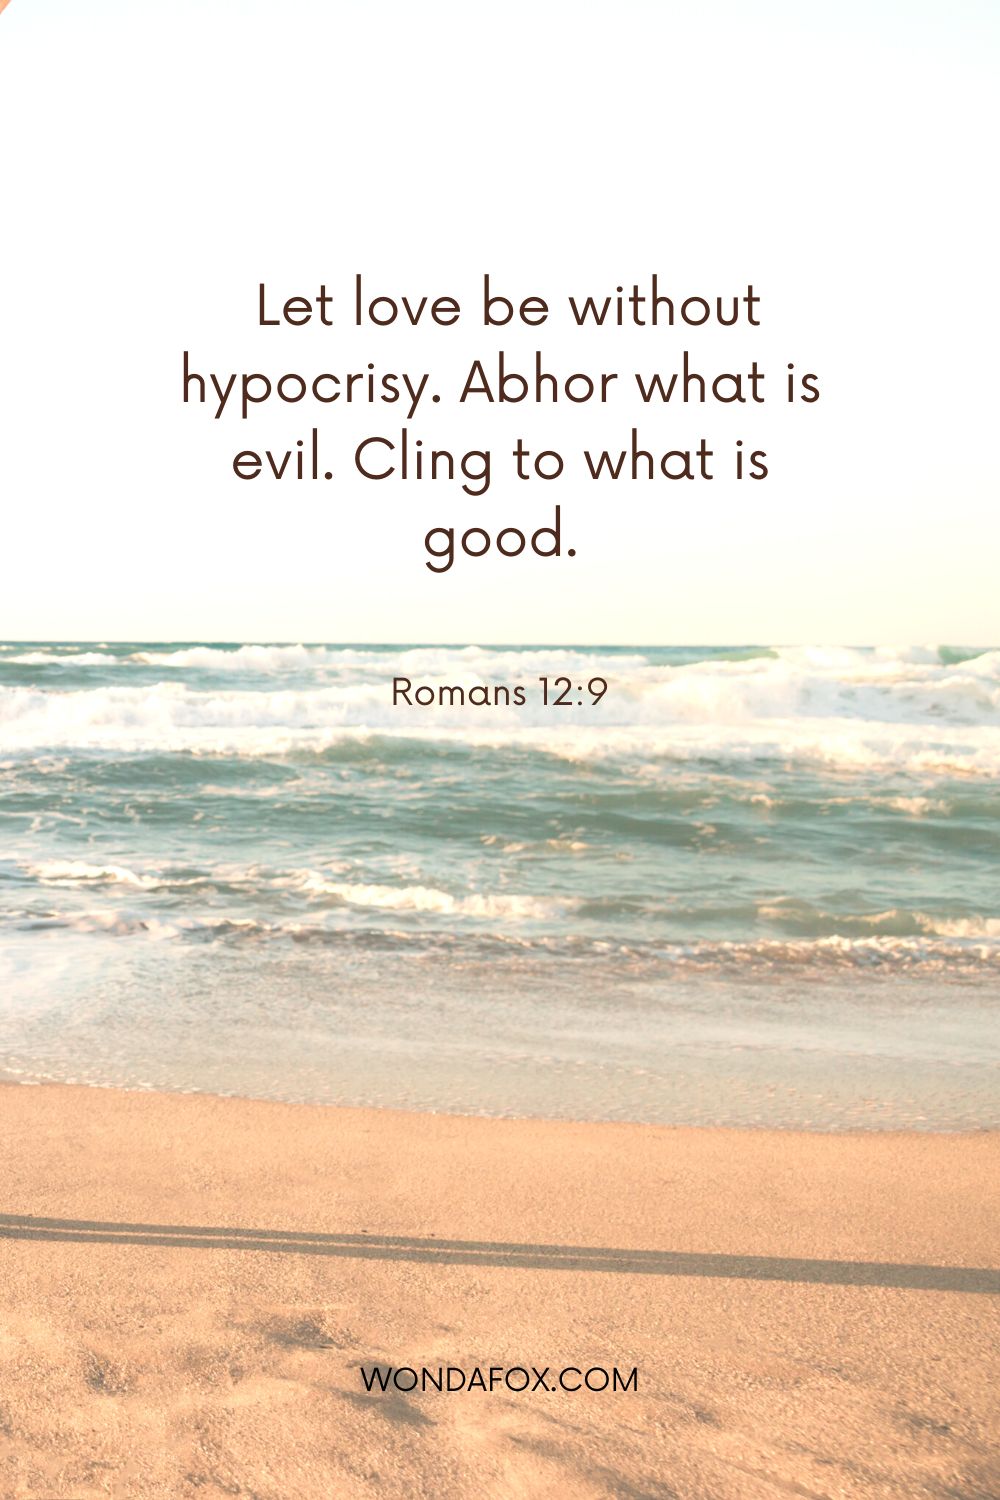  Let love be without hypocrisy. Abhor what is evil. Cling to what is good. Bible Verses About Hatred